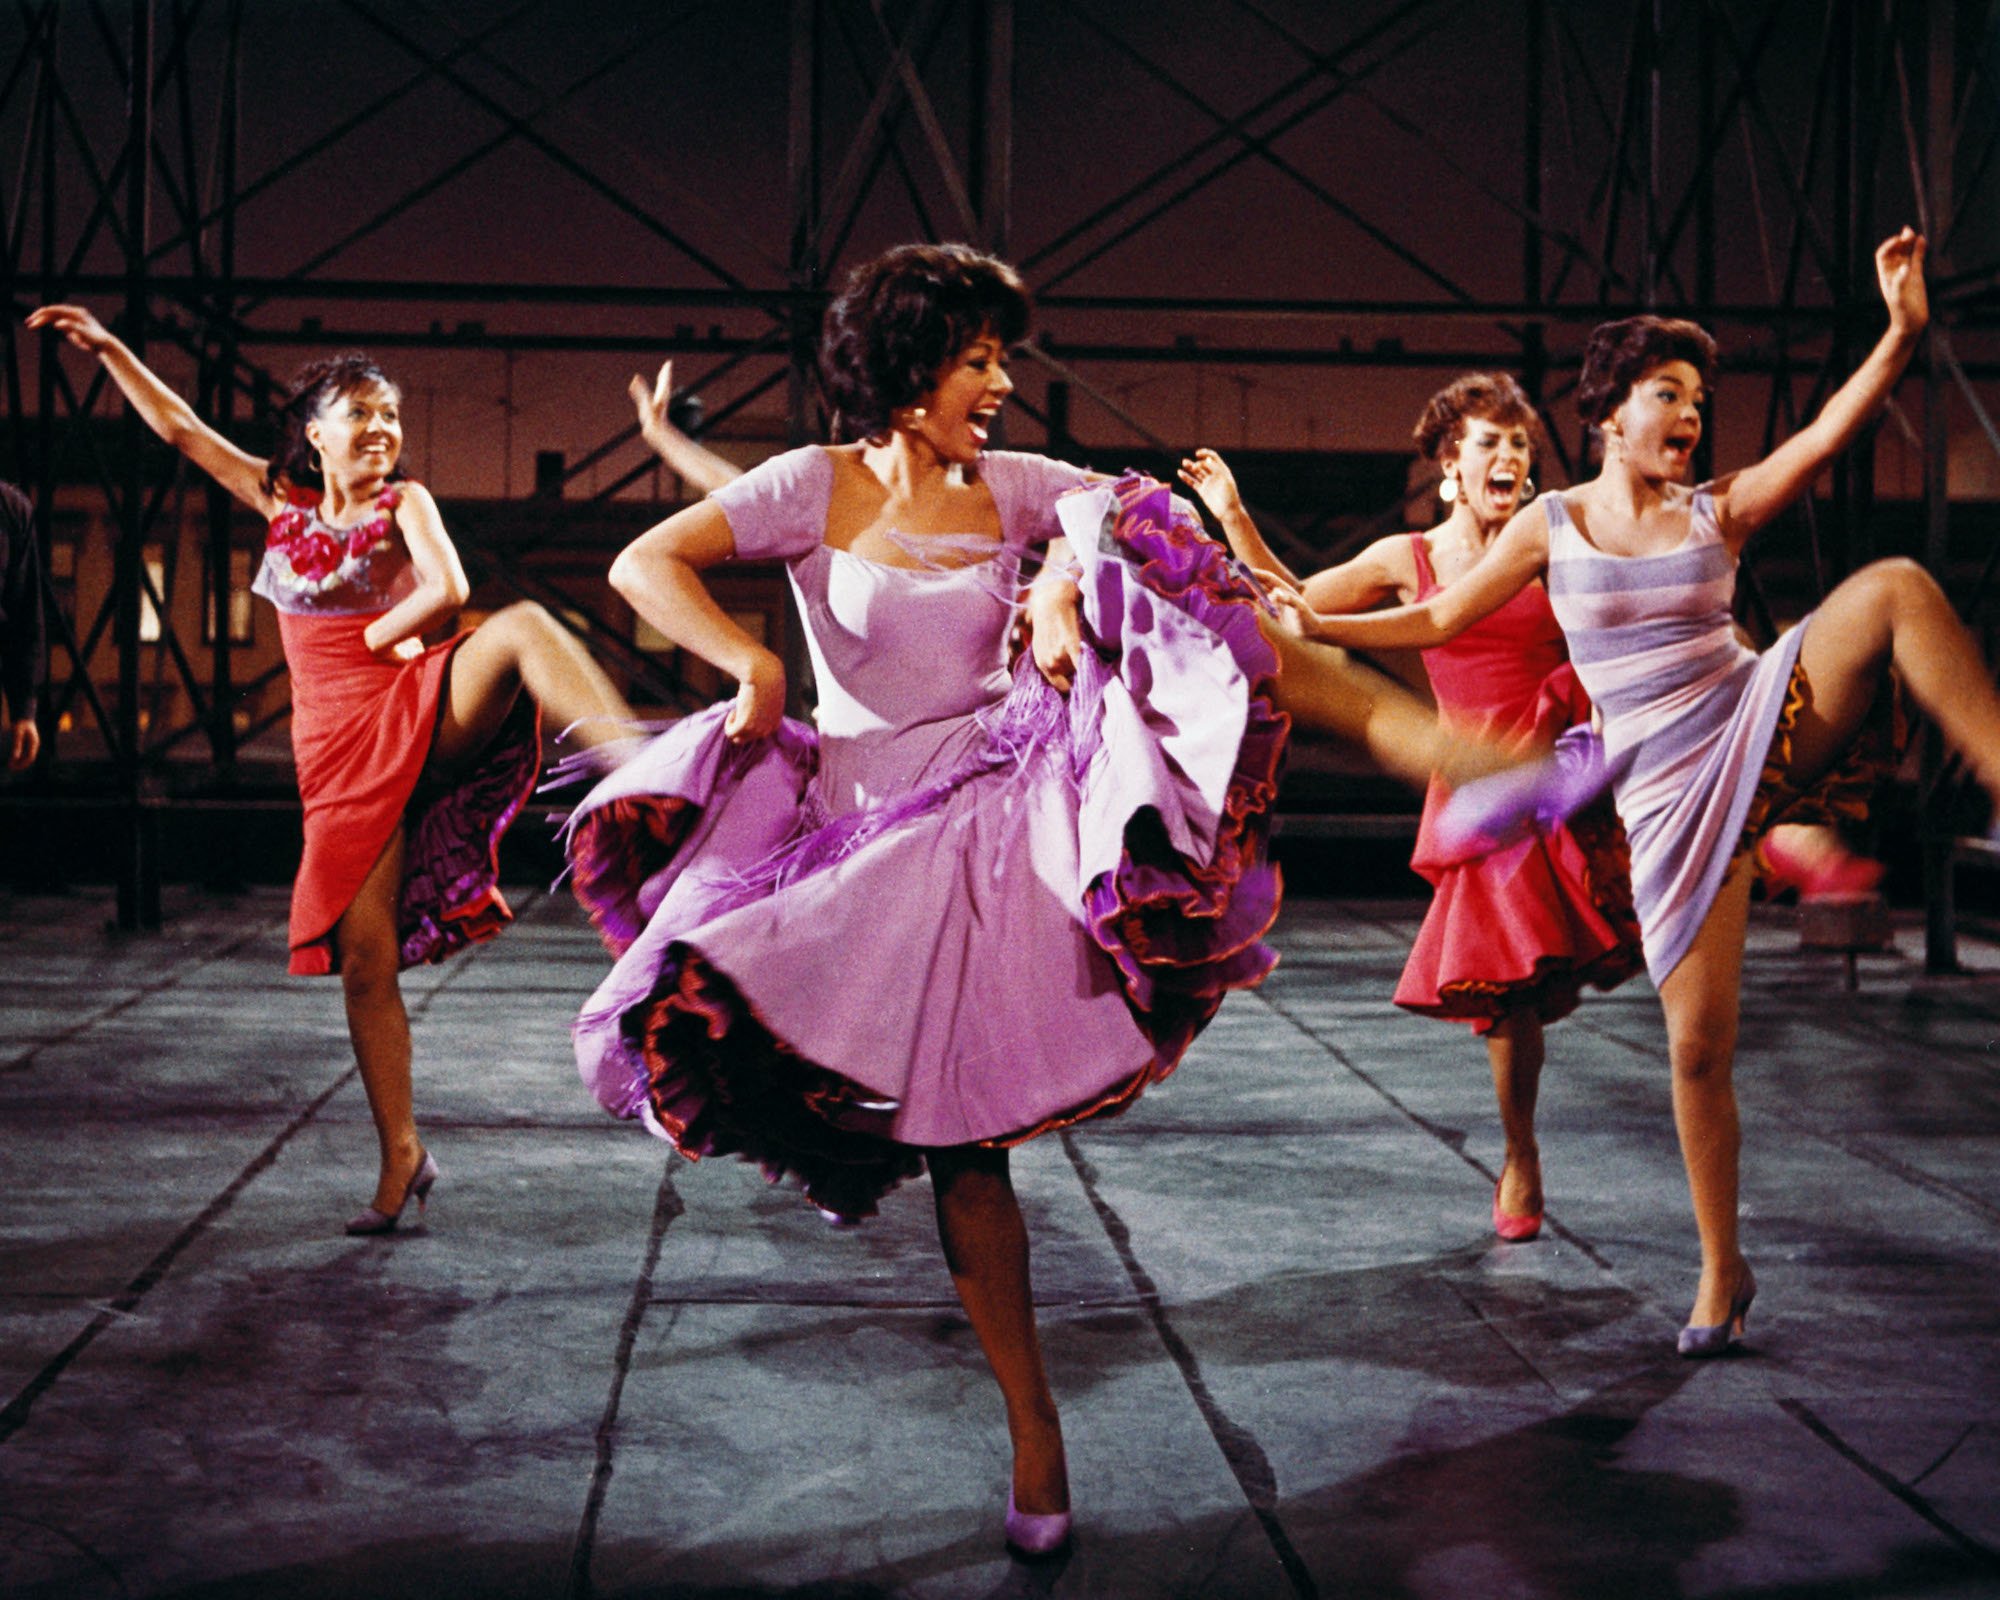 Rita Moreno performing 'America' in 'West Side Story' (1961). She wears her iconic purple dress as she dances with other female cast members on the New York City rooftop set at nighttime.